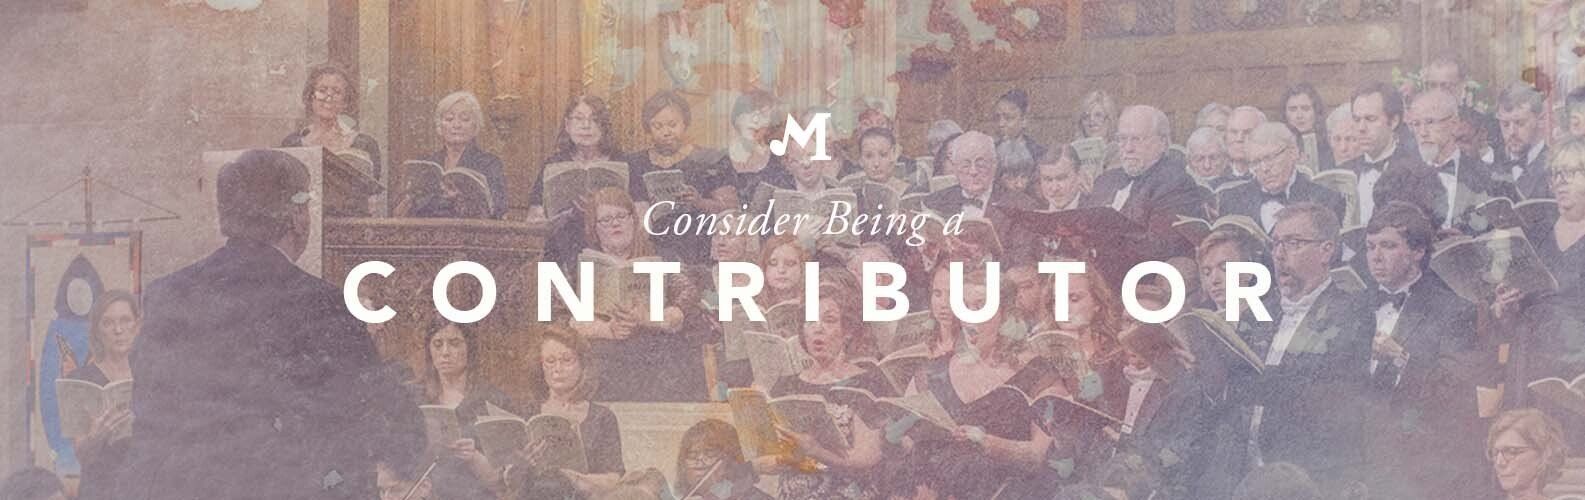 Consider Being a Contributor